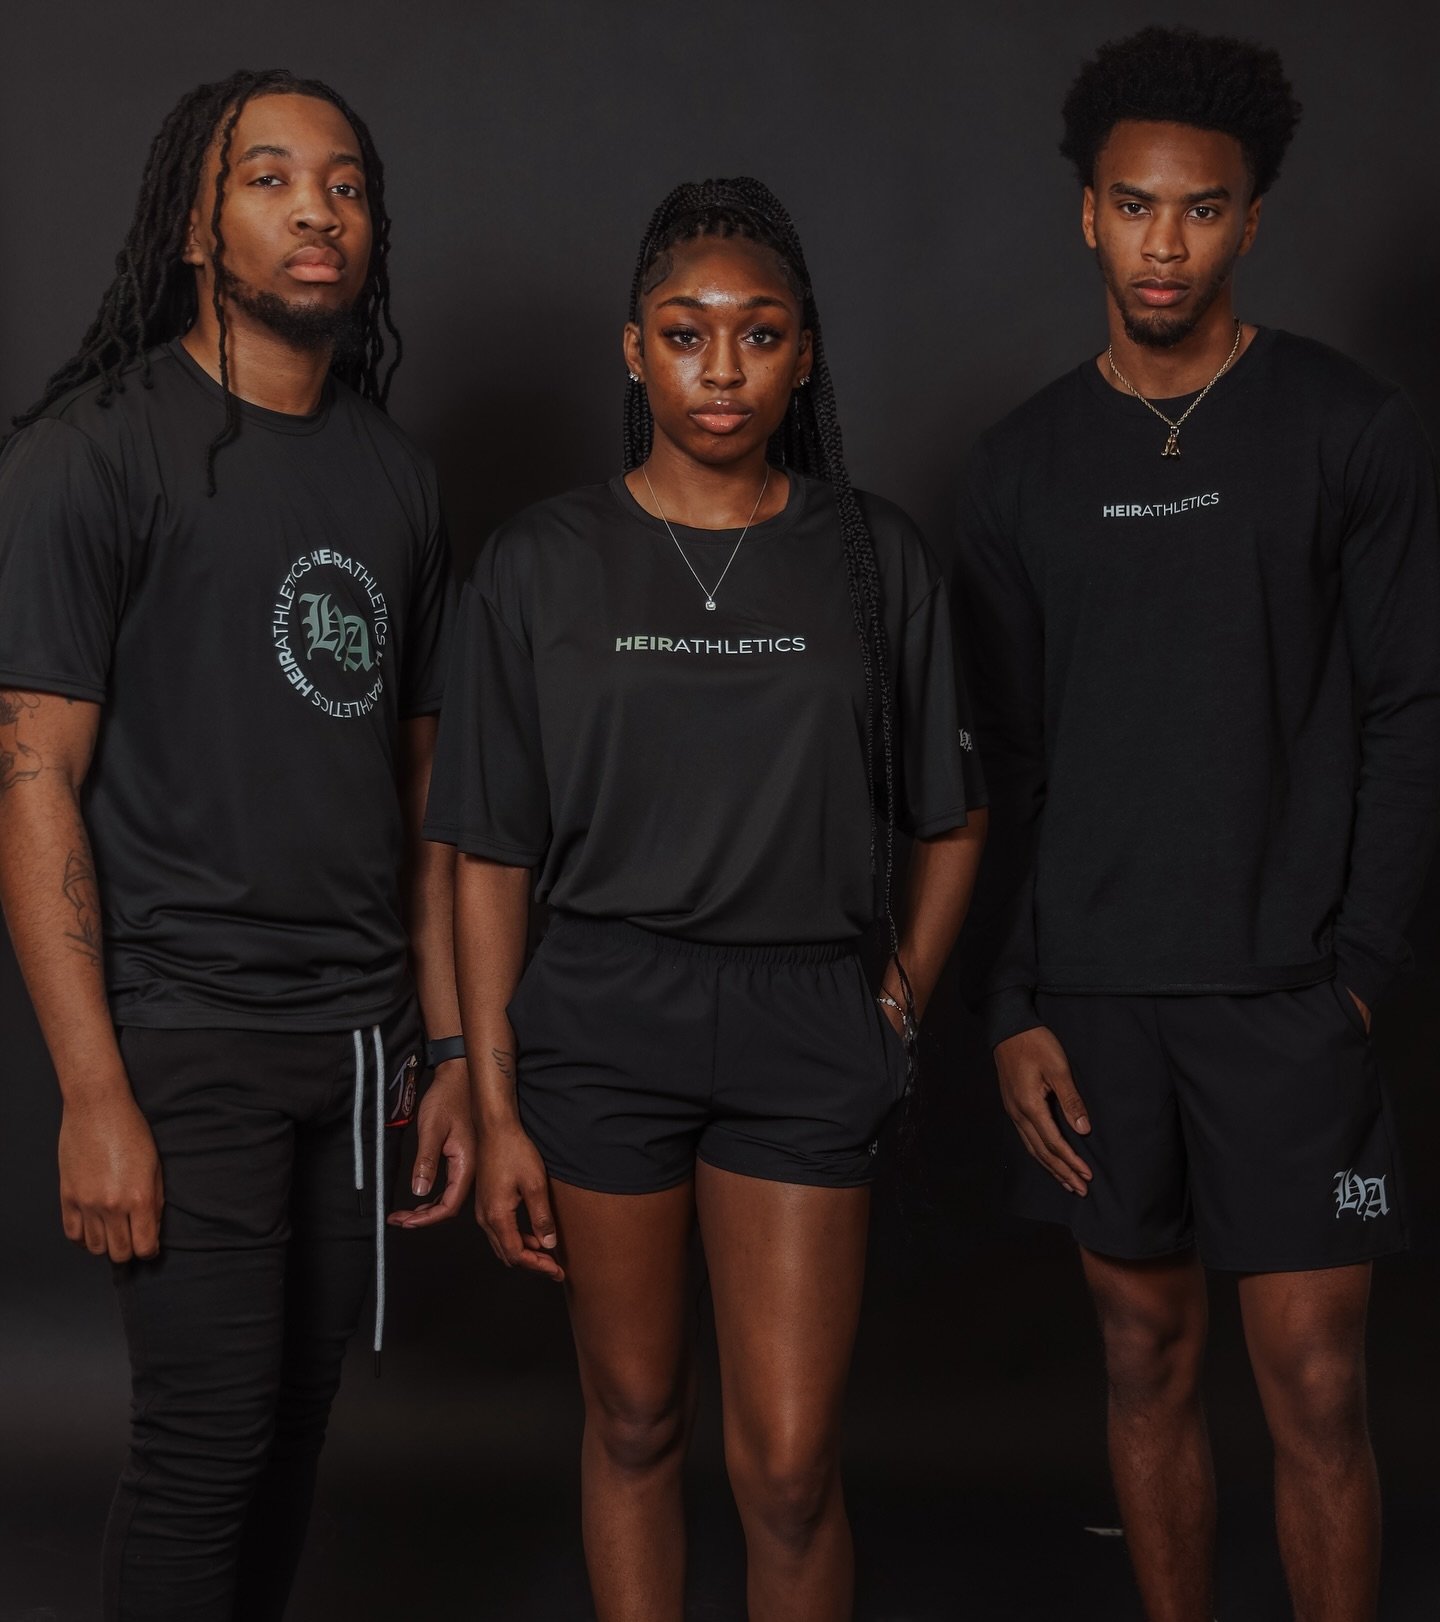 Heir Athletics drop tomorrow at 9AM CST. Get yours while supplies last. #theheirco #heirlooms